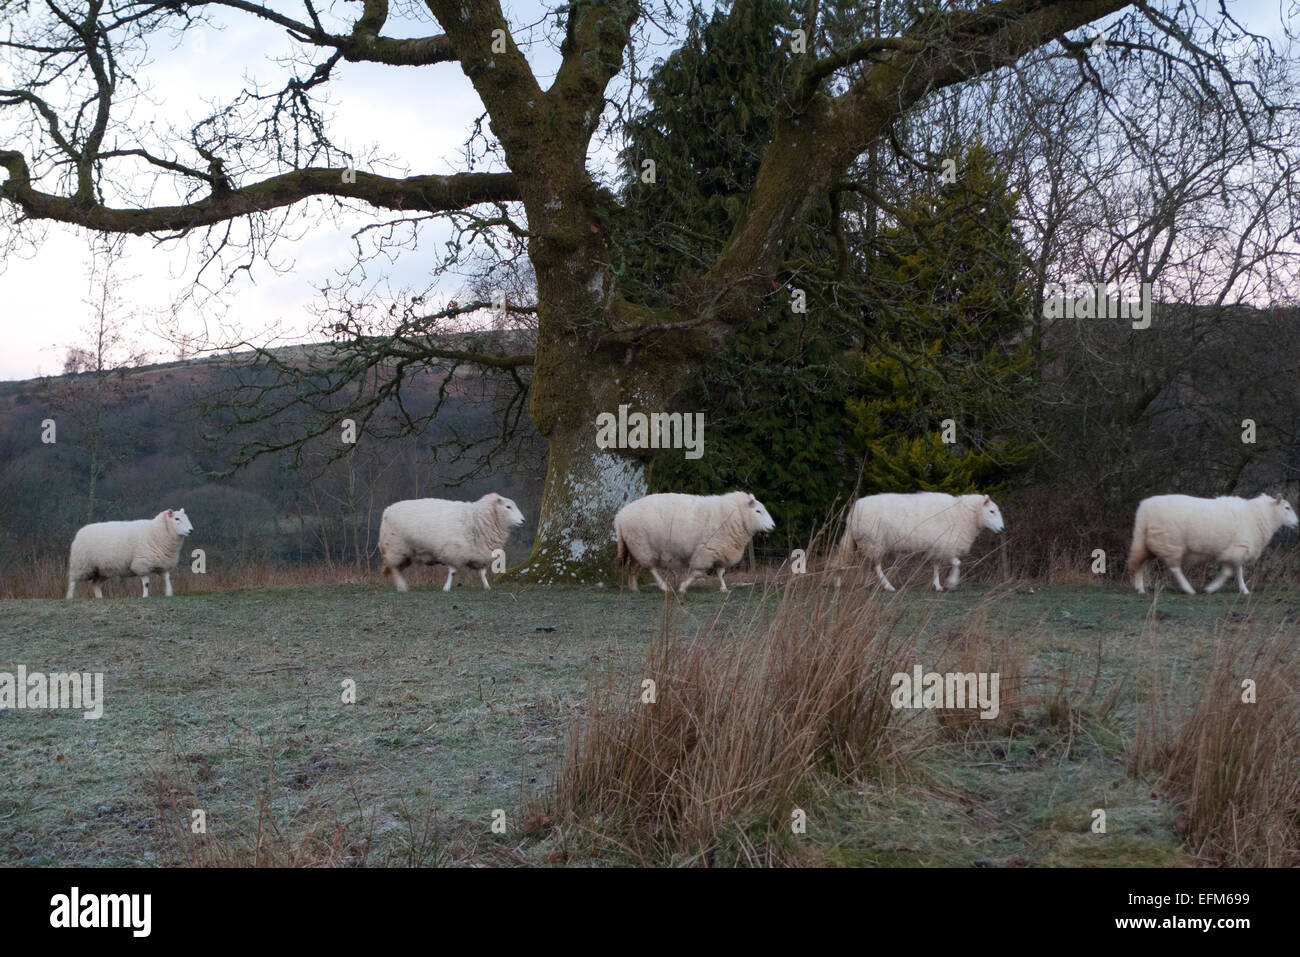 Carmarthenshire, Wales, UK. 7th Feb 2015. Sheep form a queue and head for their regular feeding position on a frosty cold morning on a rural smallholding in Carmarthenshire, West Wales UK.  The weather forecast in this part of Wales today is for increasing cloud cover with occasional spells of sunshine. Credit:  Kathy deWitt/Alamy Live News Stock Photo